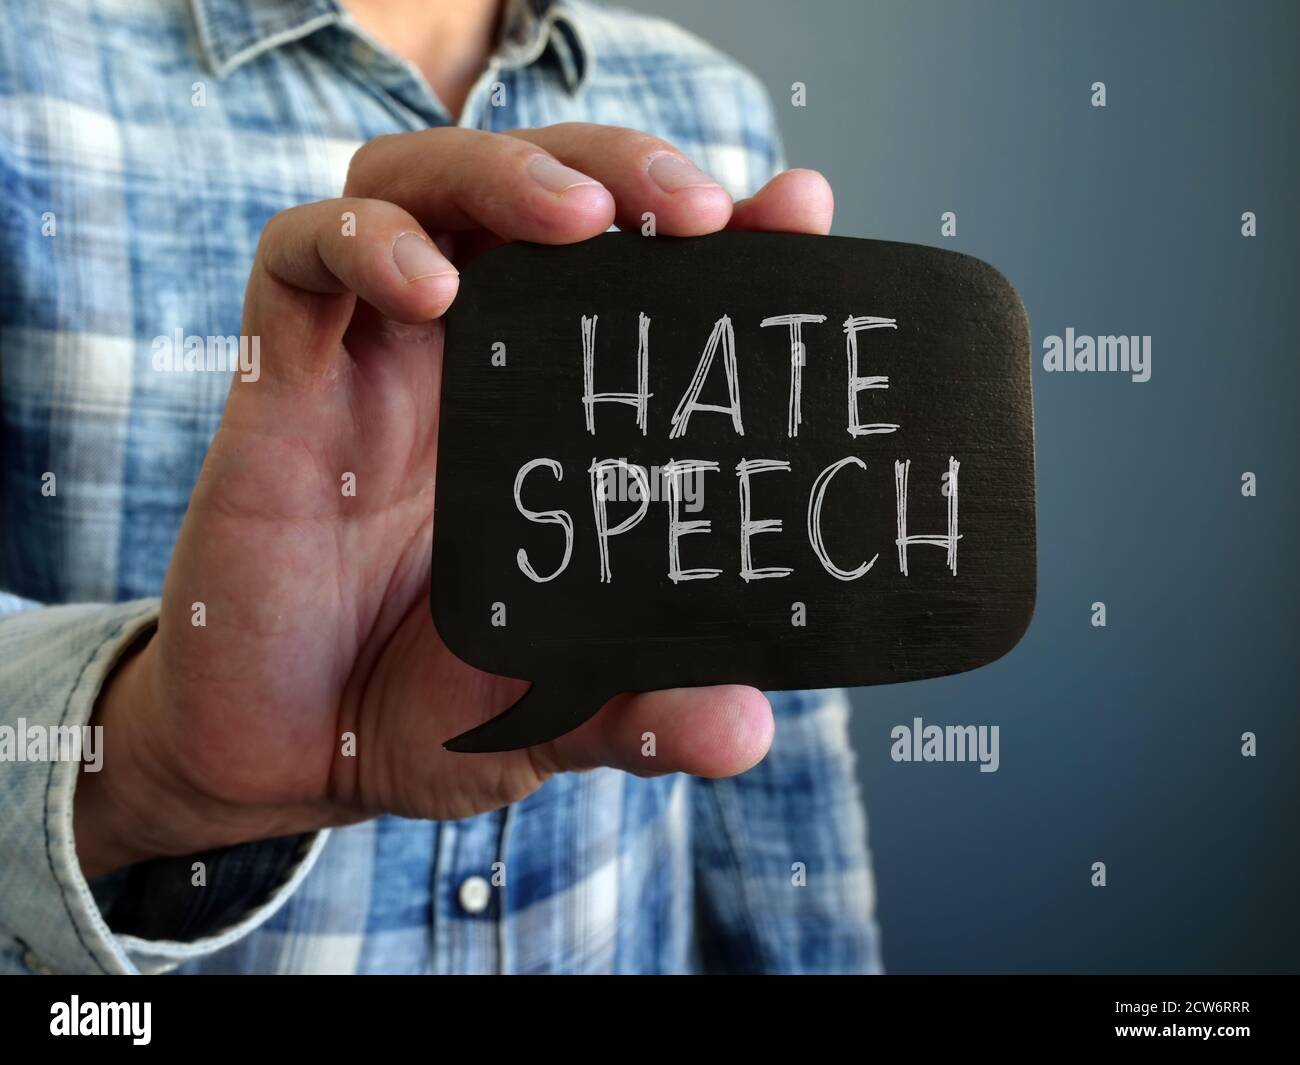 Hate speech concept. A hand holds a black plate. Stock Photo